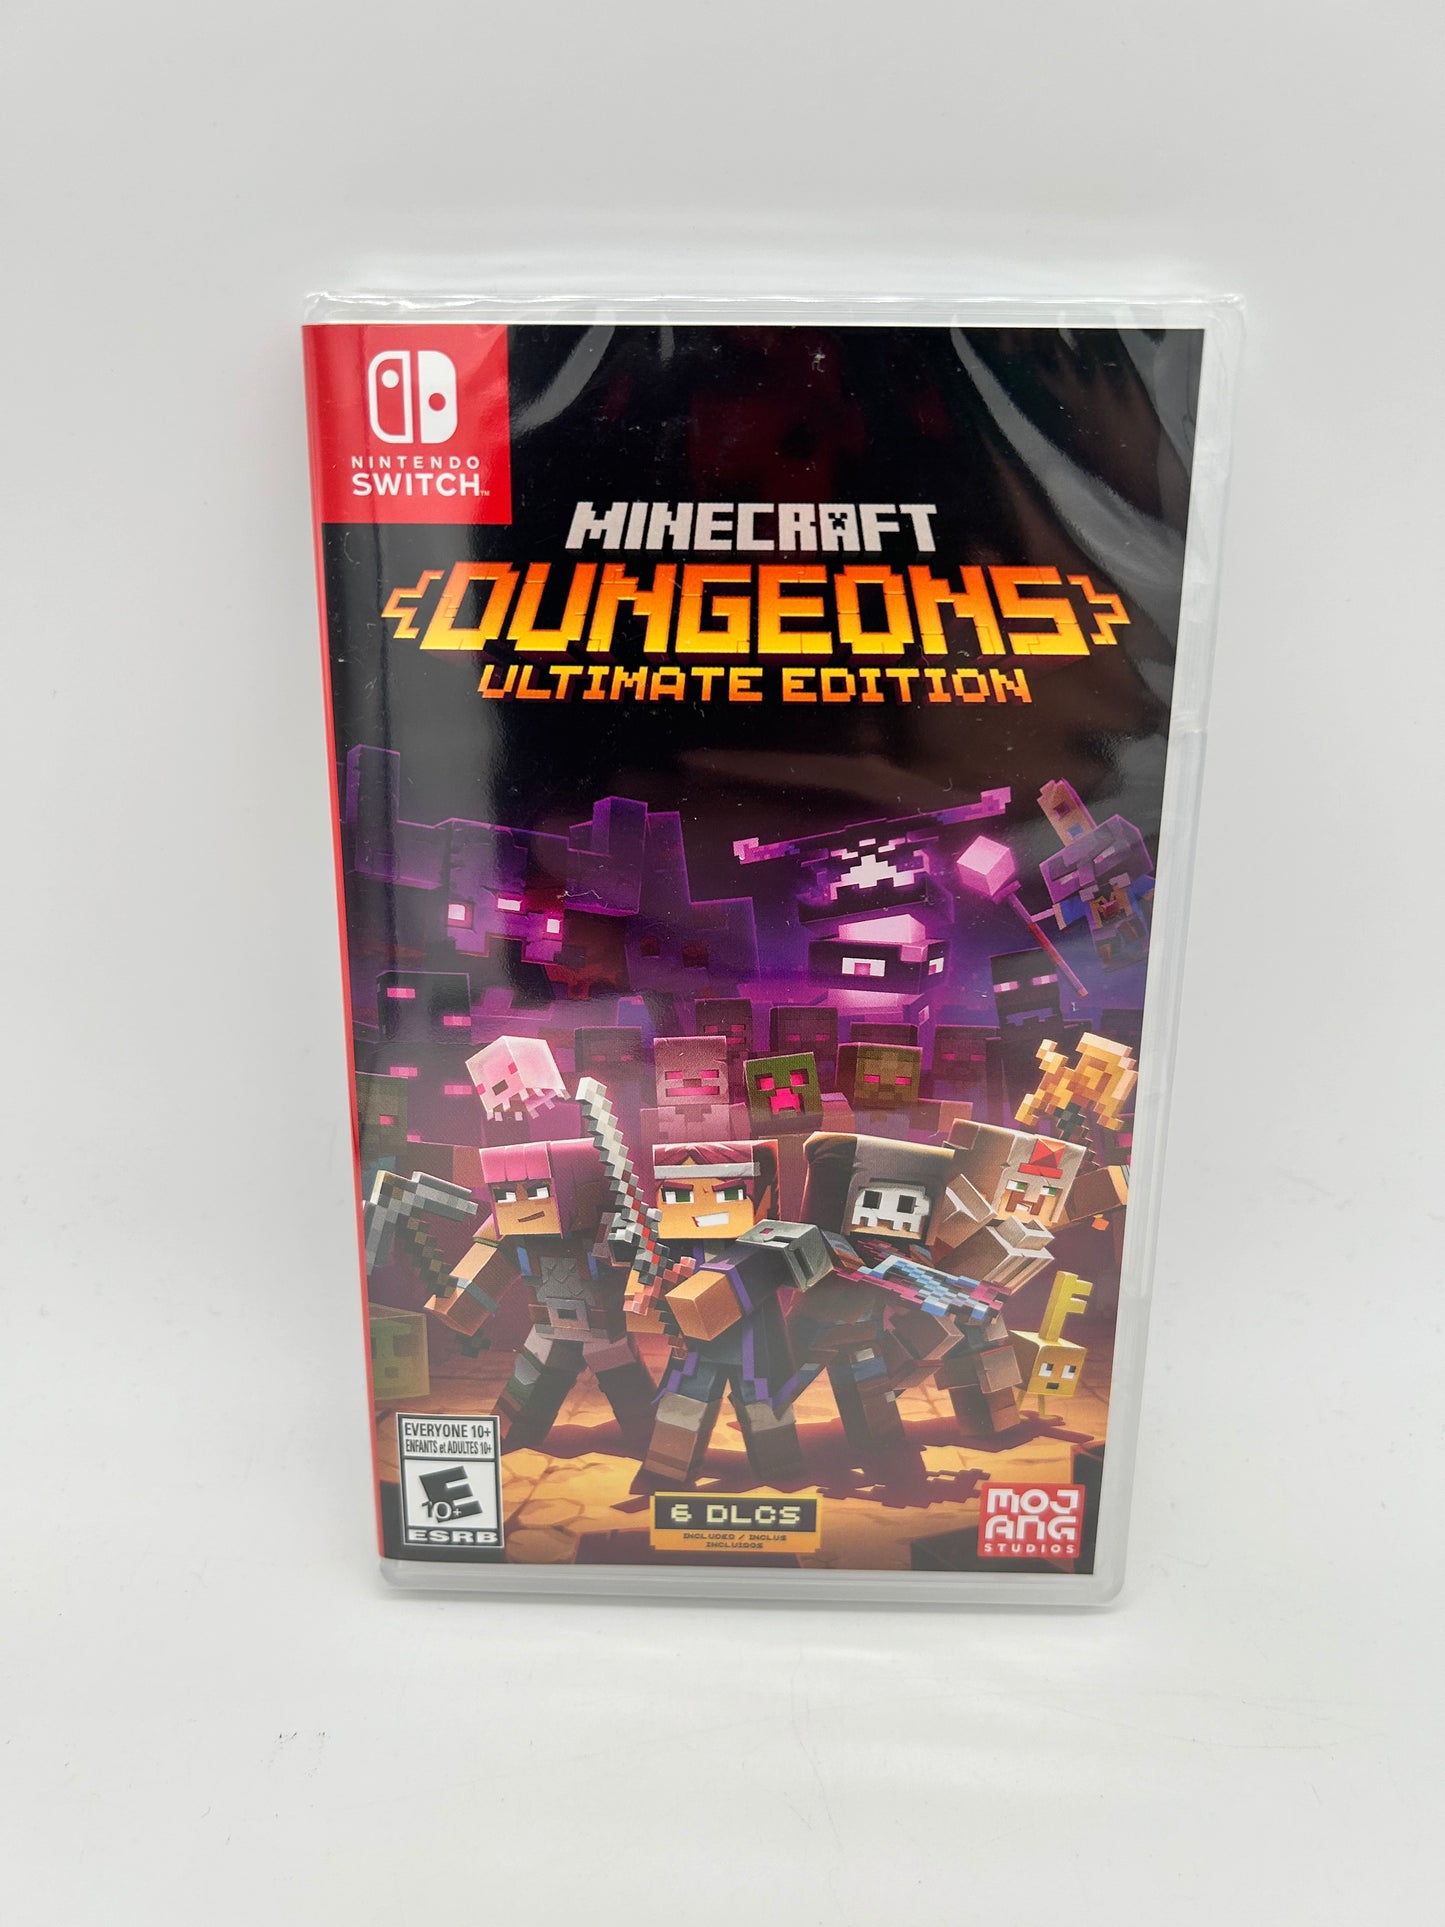 PiXEL-RETRO.COM : NINTENDO SWITCH NEW SEALED IN BOX COMPLETE MANUAL GAME NTSC MINECRAFT DUNGEONS ULTIMATE EDITION